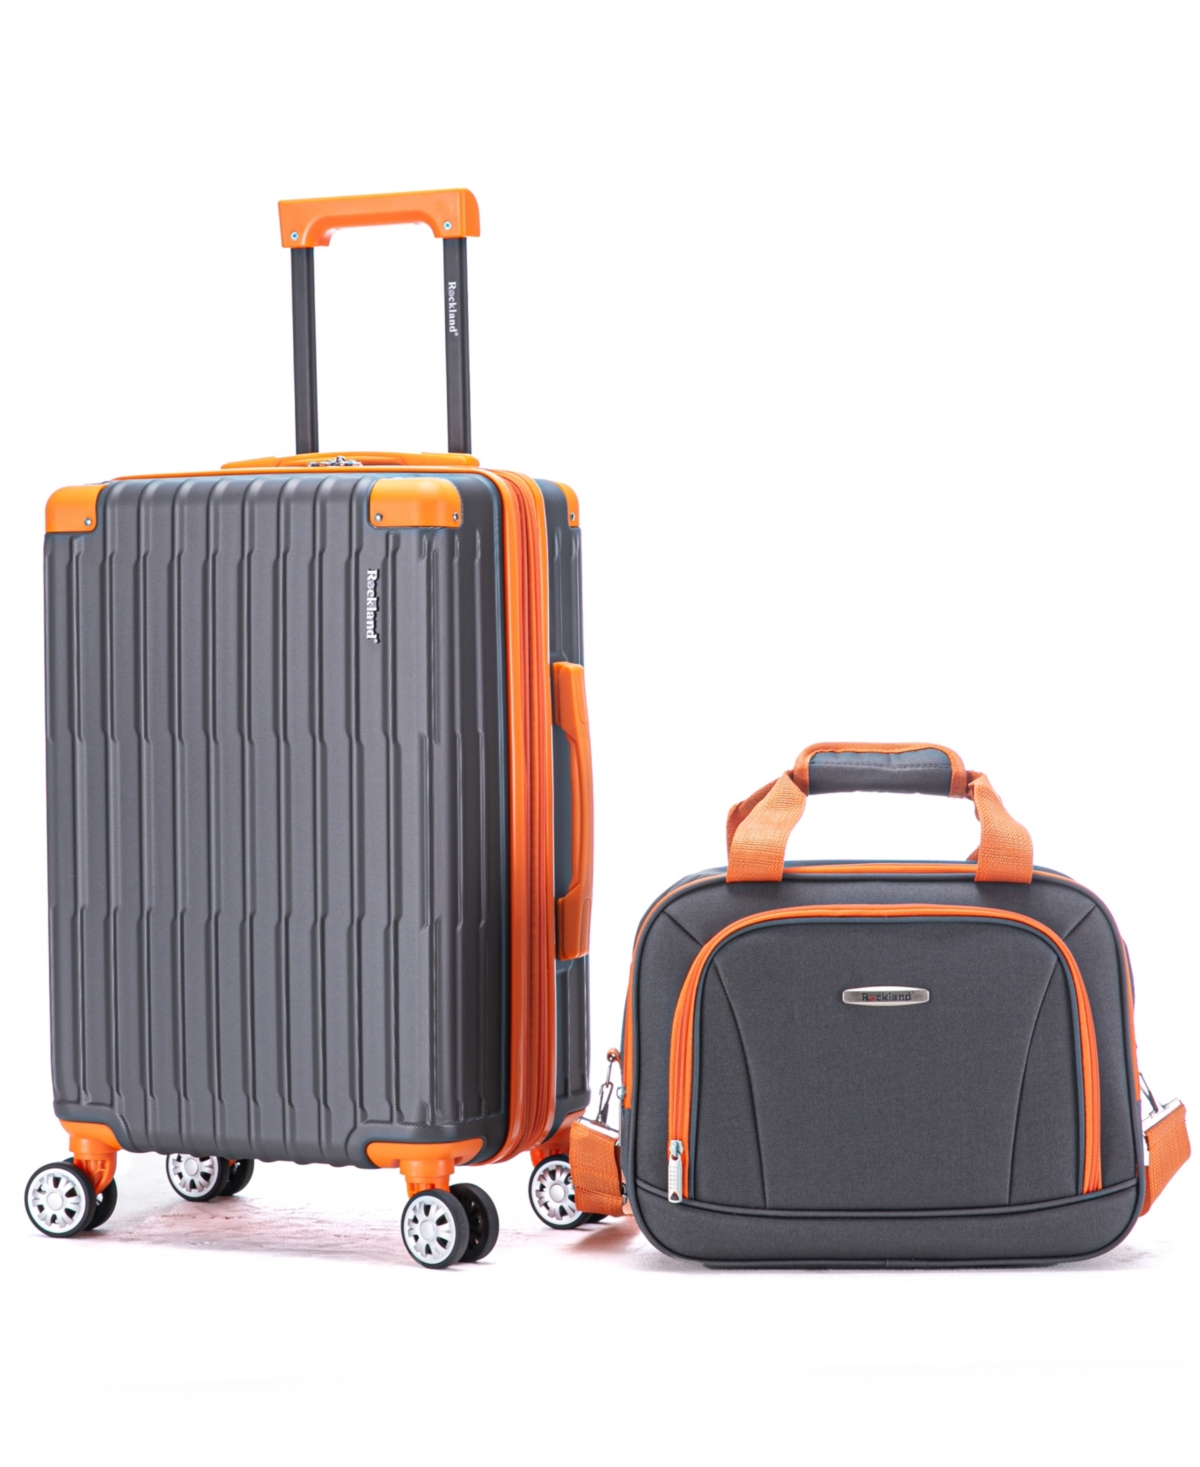 Rockland Napa Valley Luggage Set, 2 Piece In Charcoal